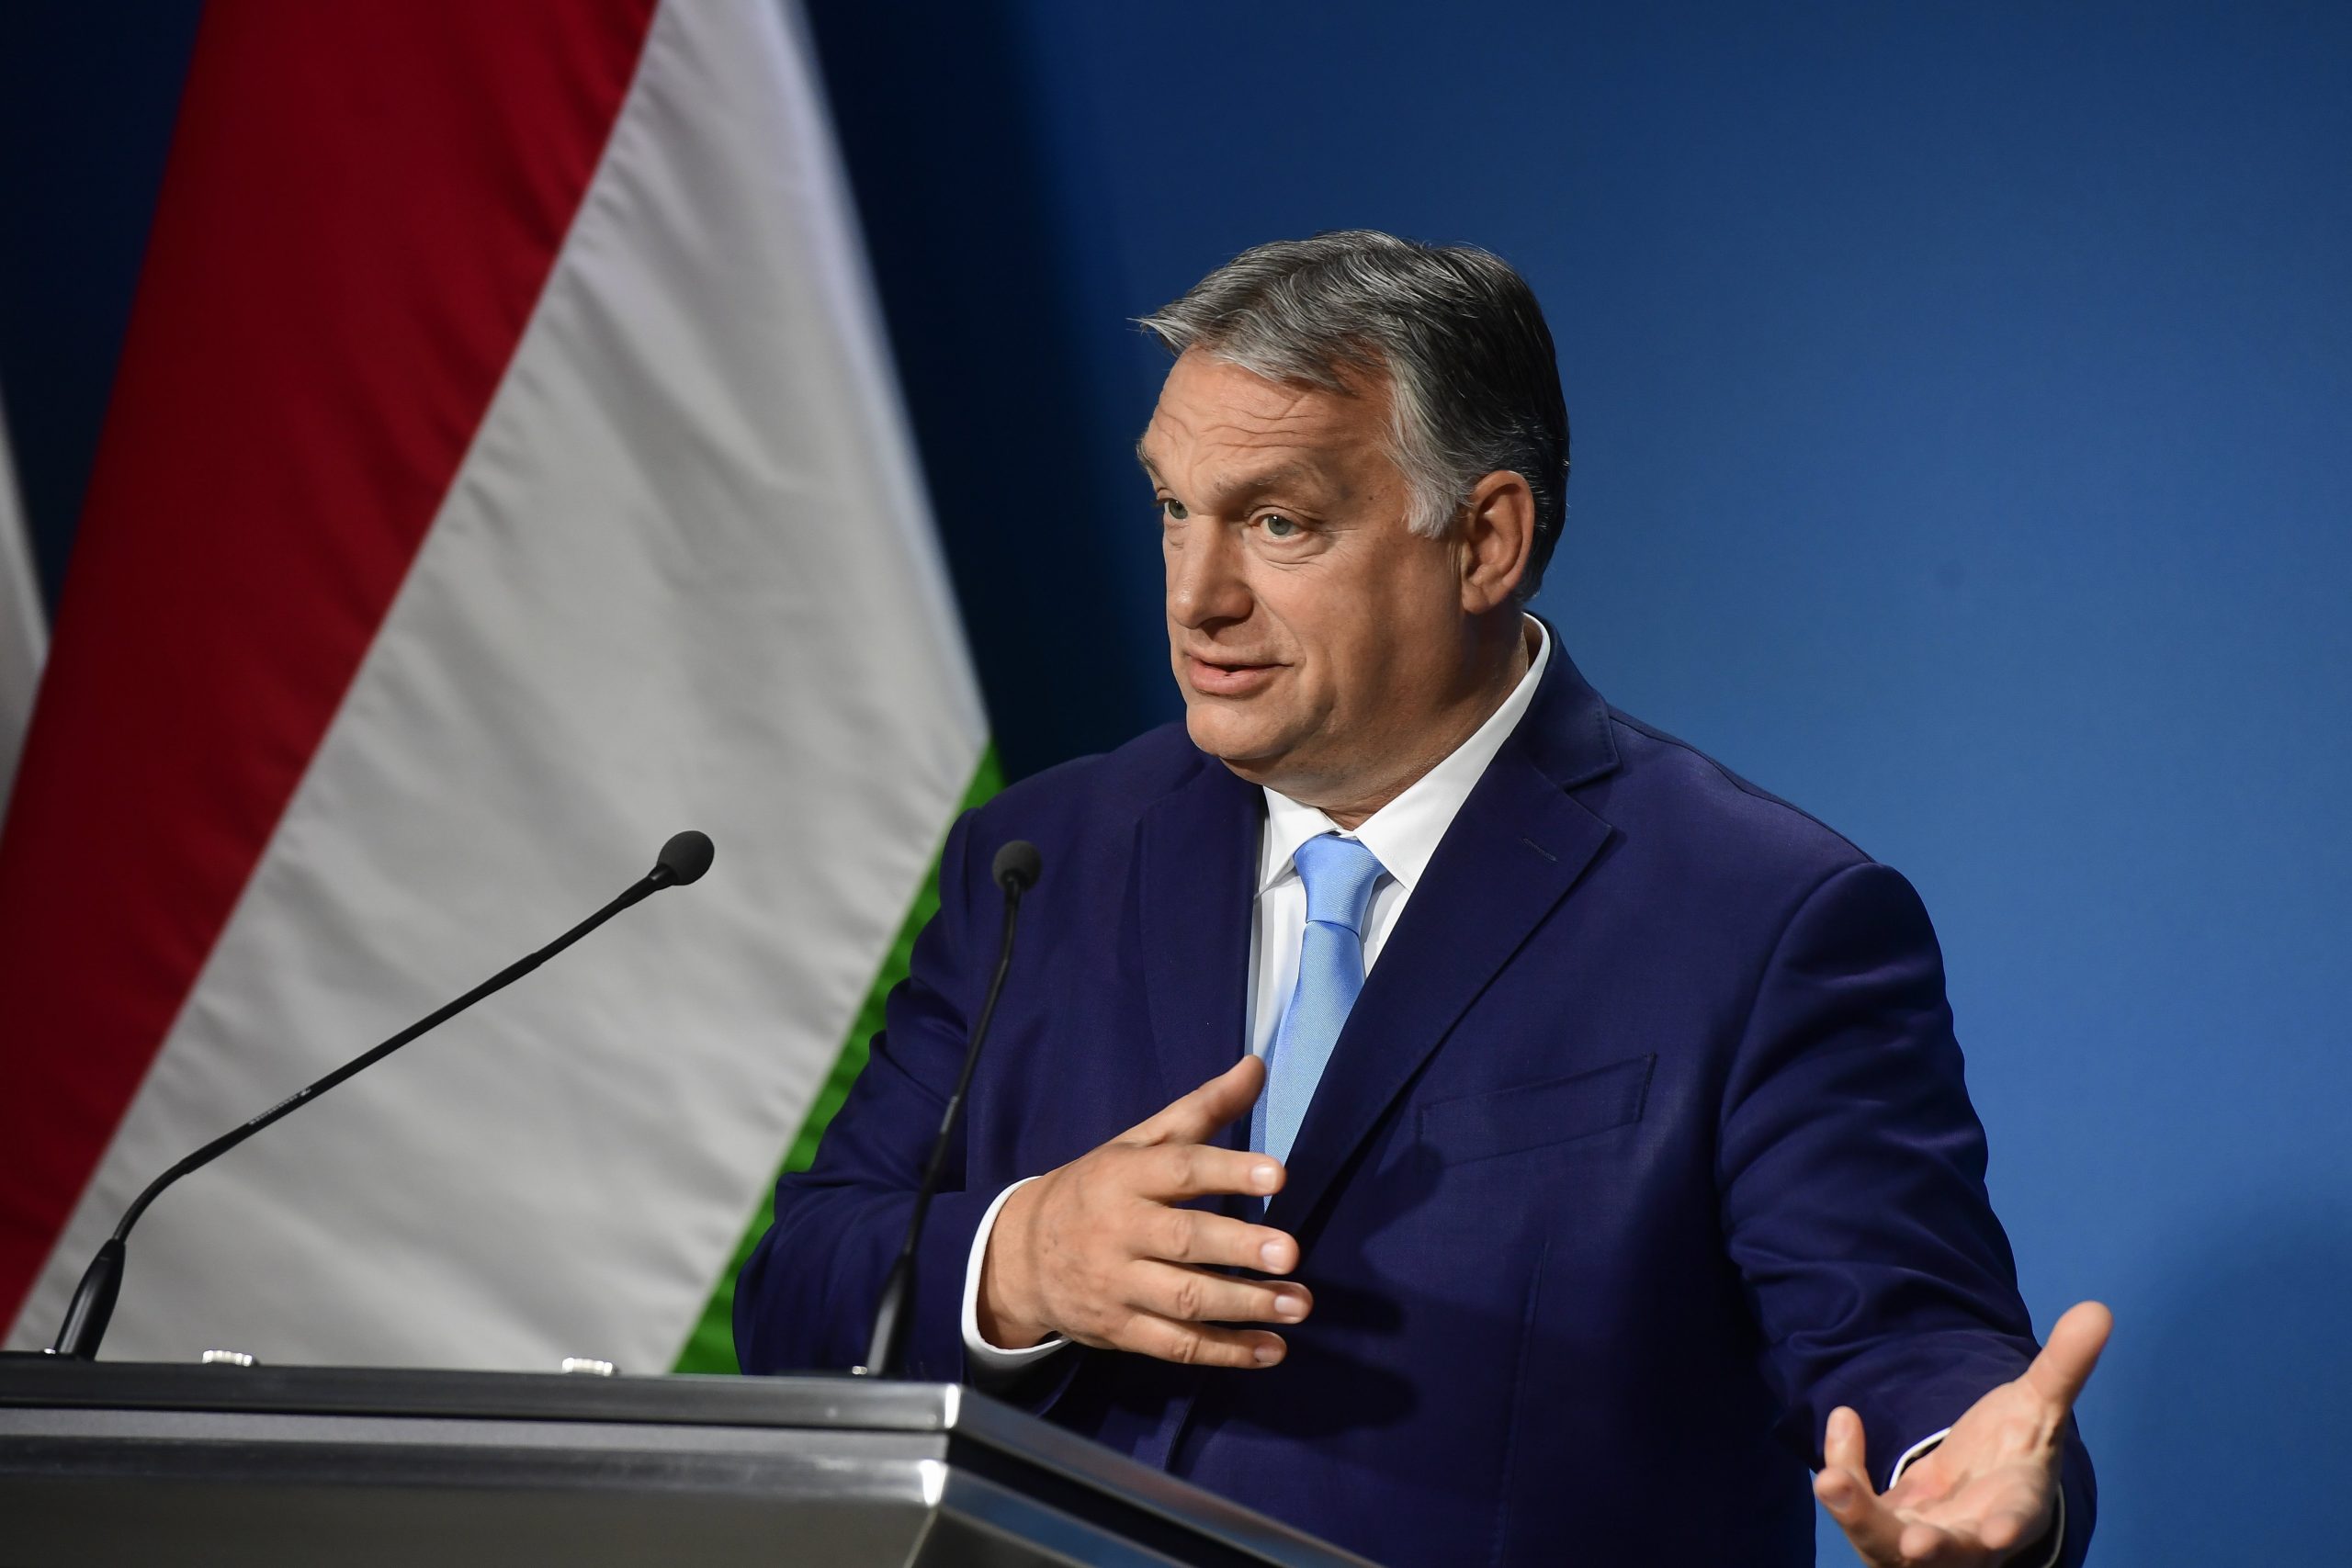 Orbán: Economic Stimulus, Protection against Virus, Protecting Children Main Issues for 2022